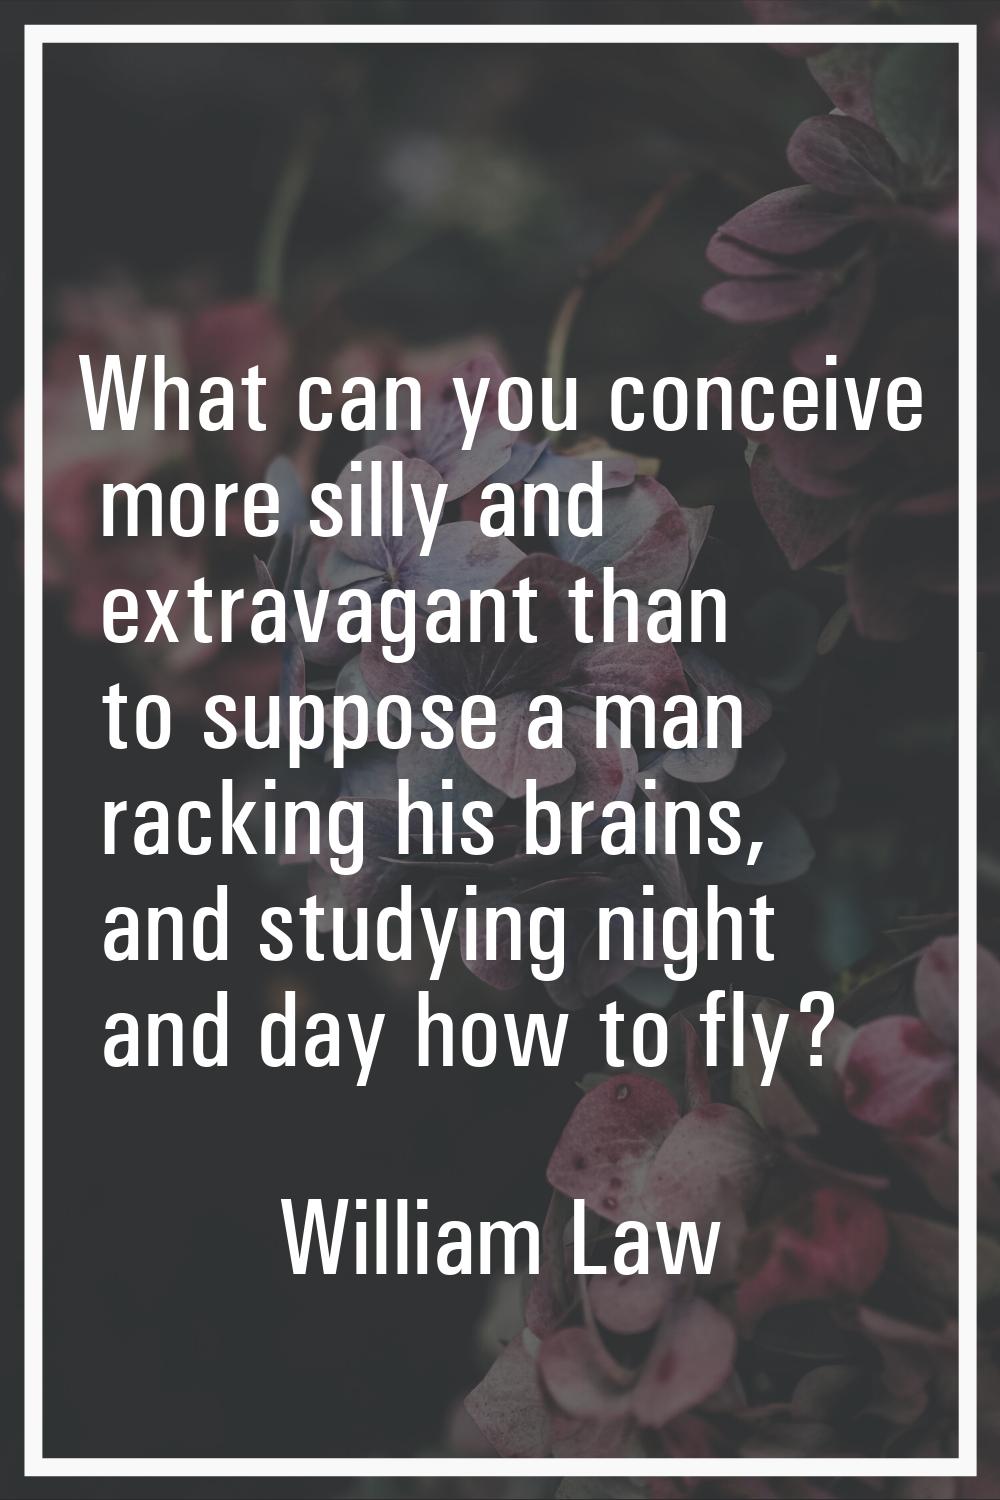 What can you conceive more silly and extravagant than to suppose a man racking his brains, and stud